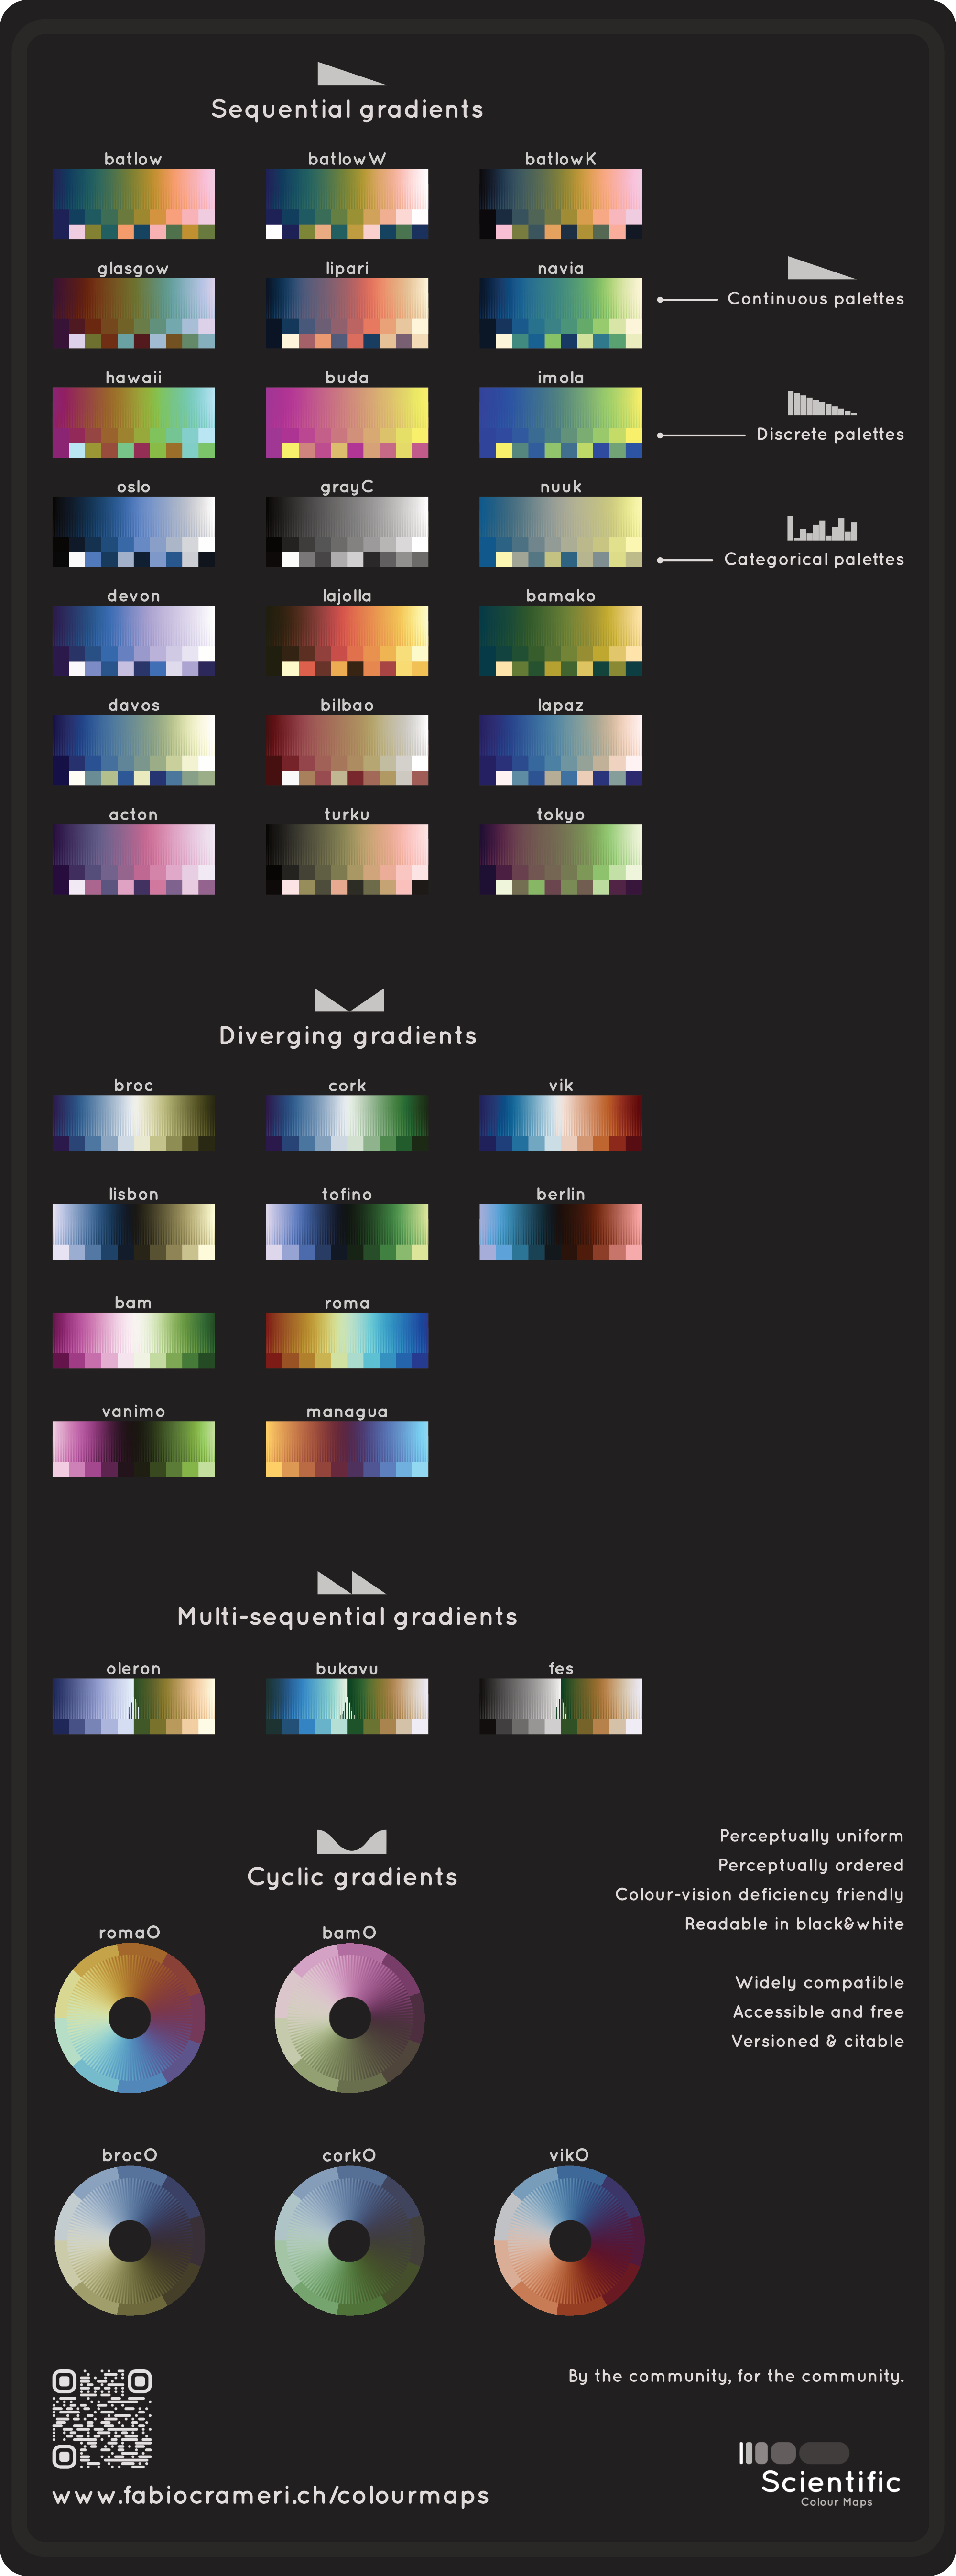 The suite of Scientific colour maps for data-true and universally accessible, scientific data visualisation.